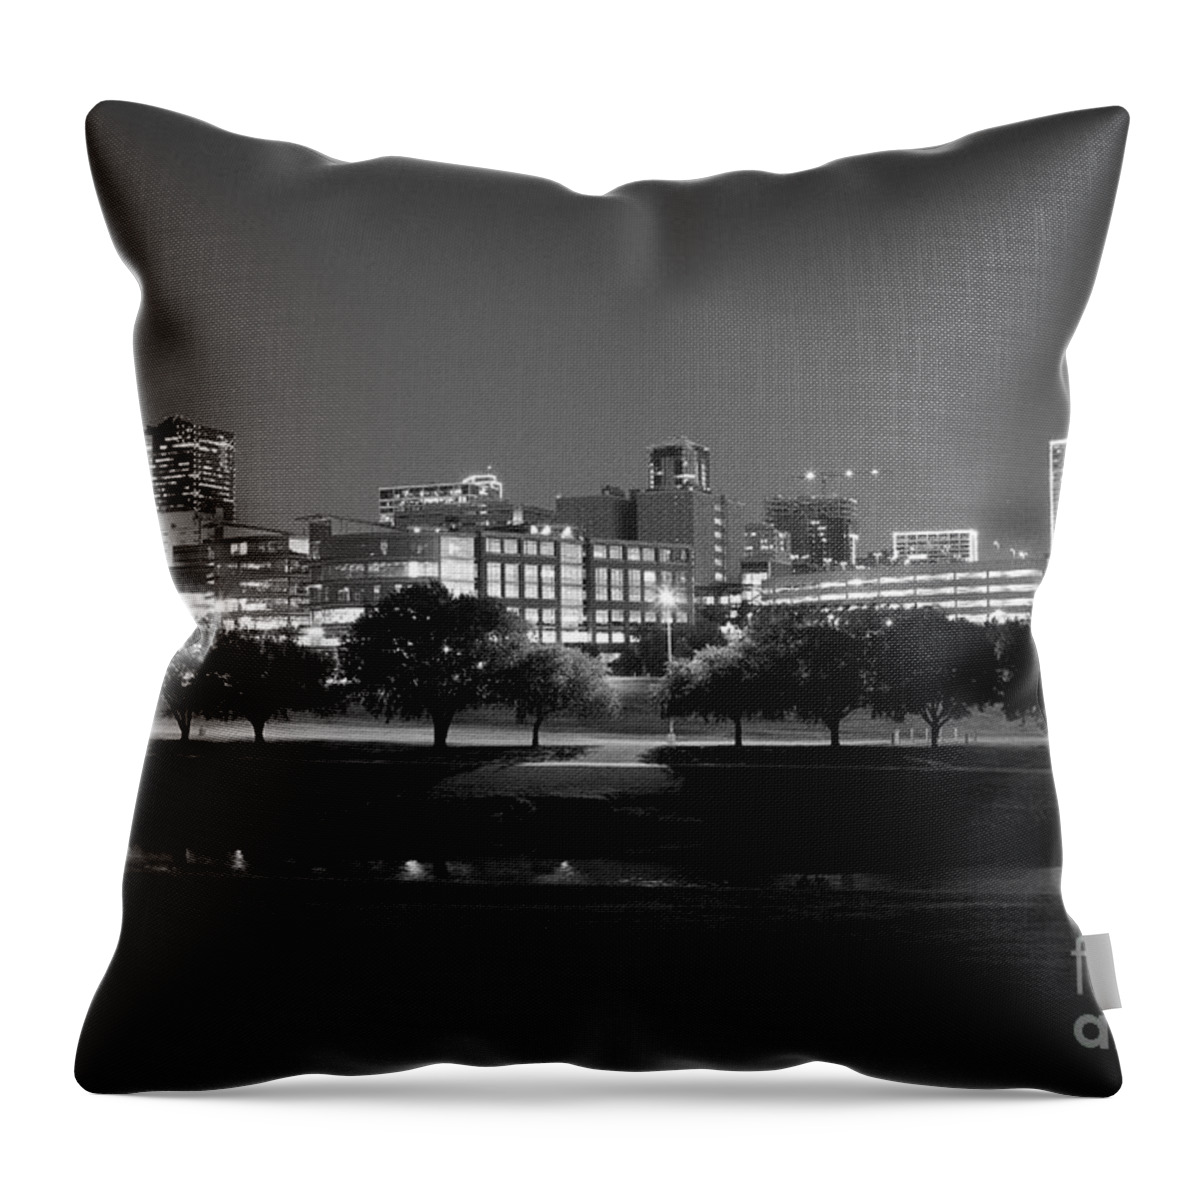 Pioneers Throw Pillow featuring the photograph Ft. Worth Texas Skyline Dusk Black and White by Greg Kopriva